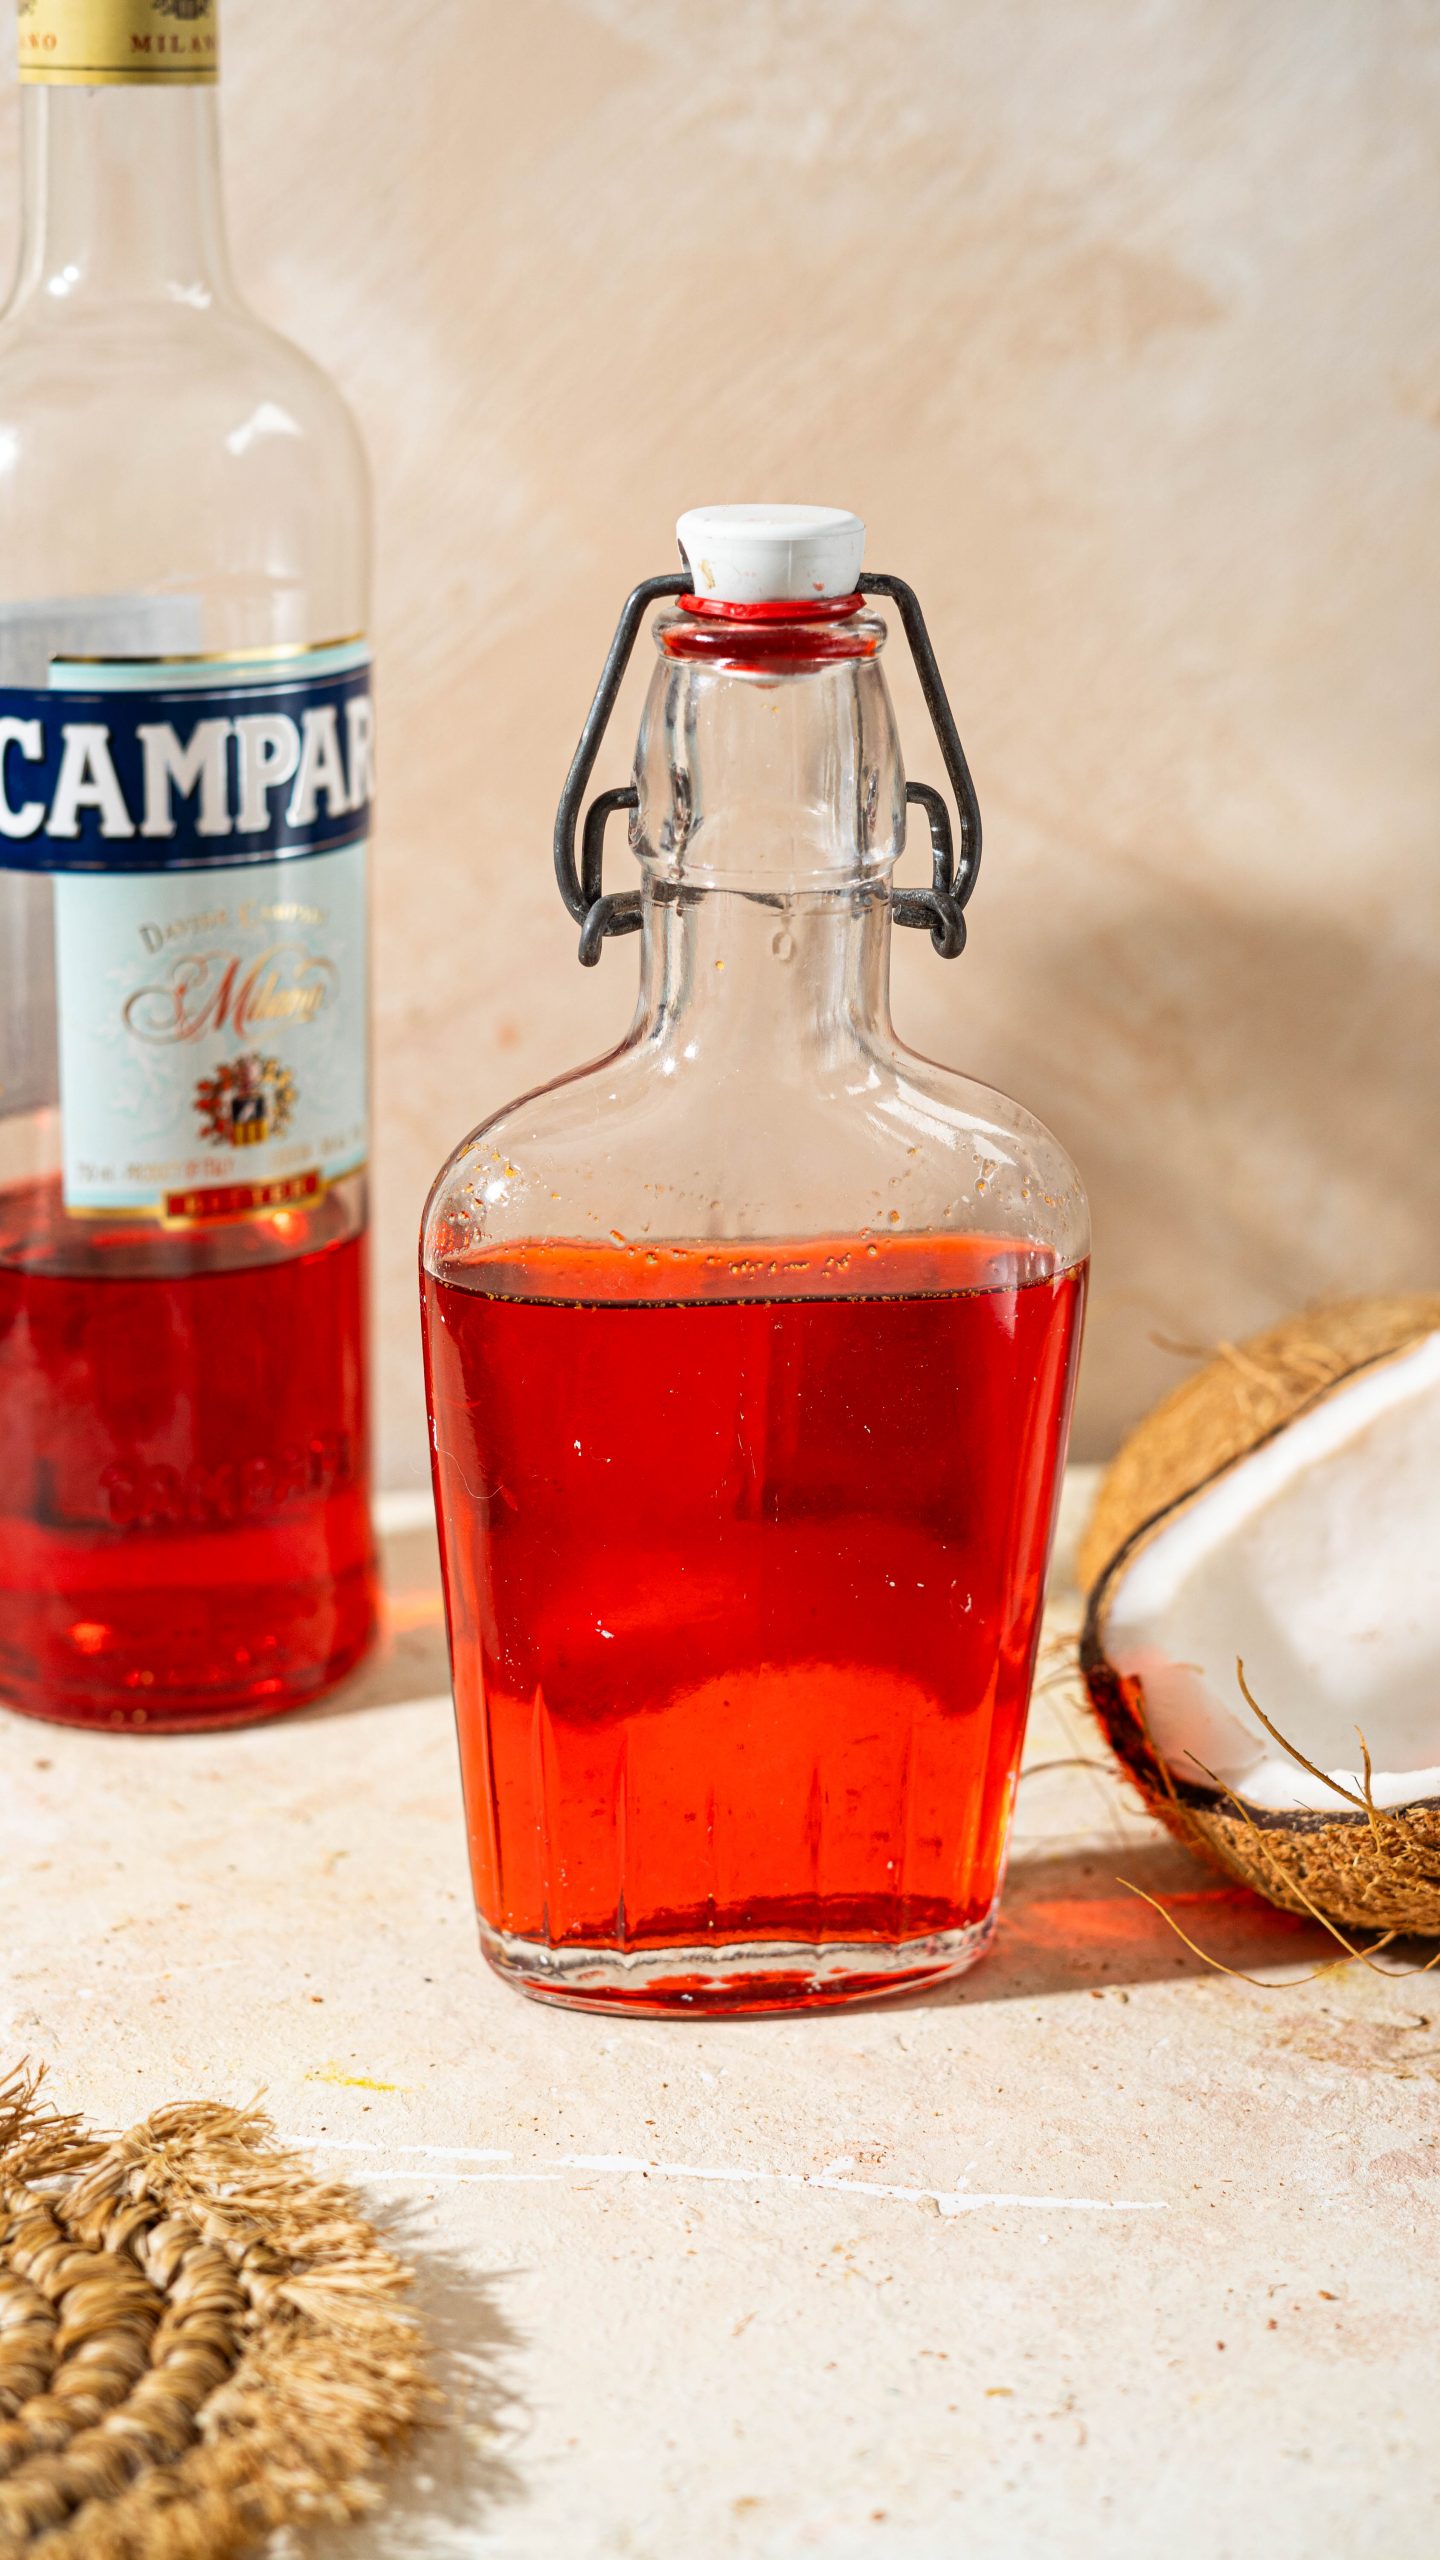 Fat-Washed Coconut Campari & How to Fat-Wash Sprits - Craft and Cocktails